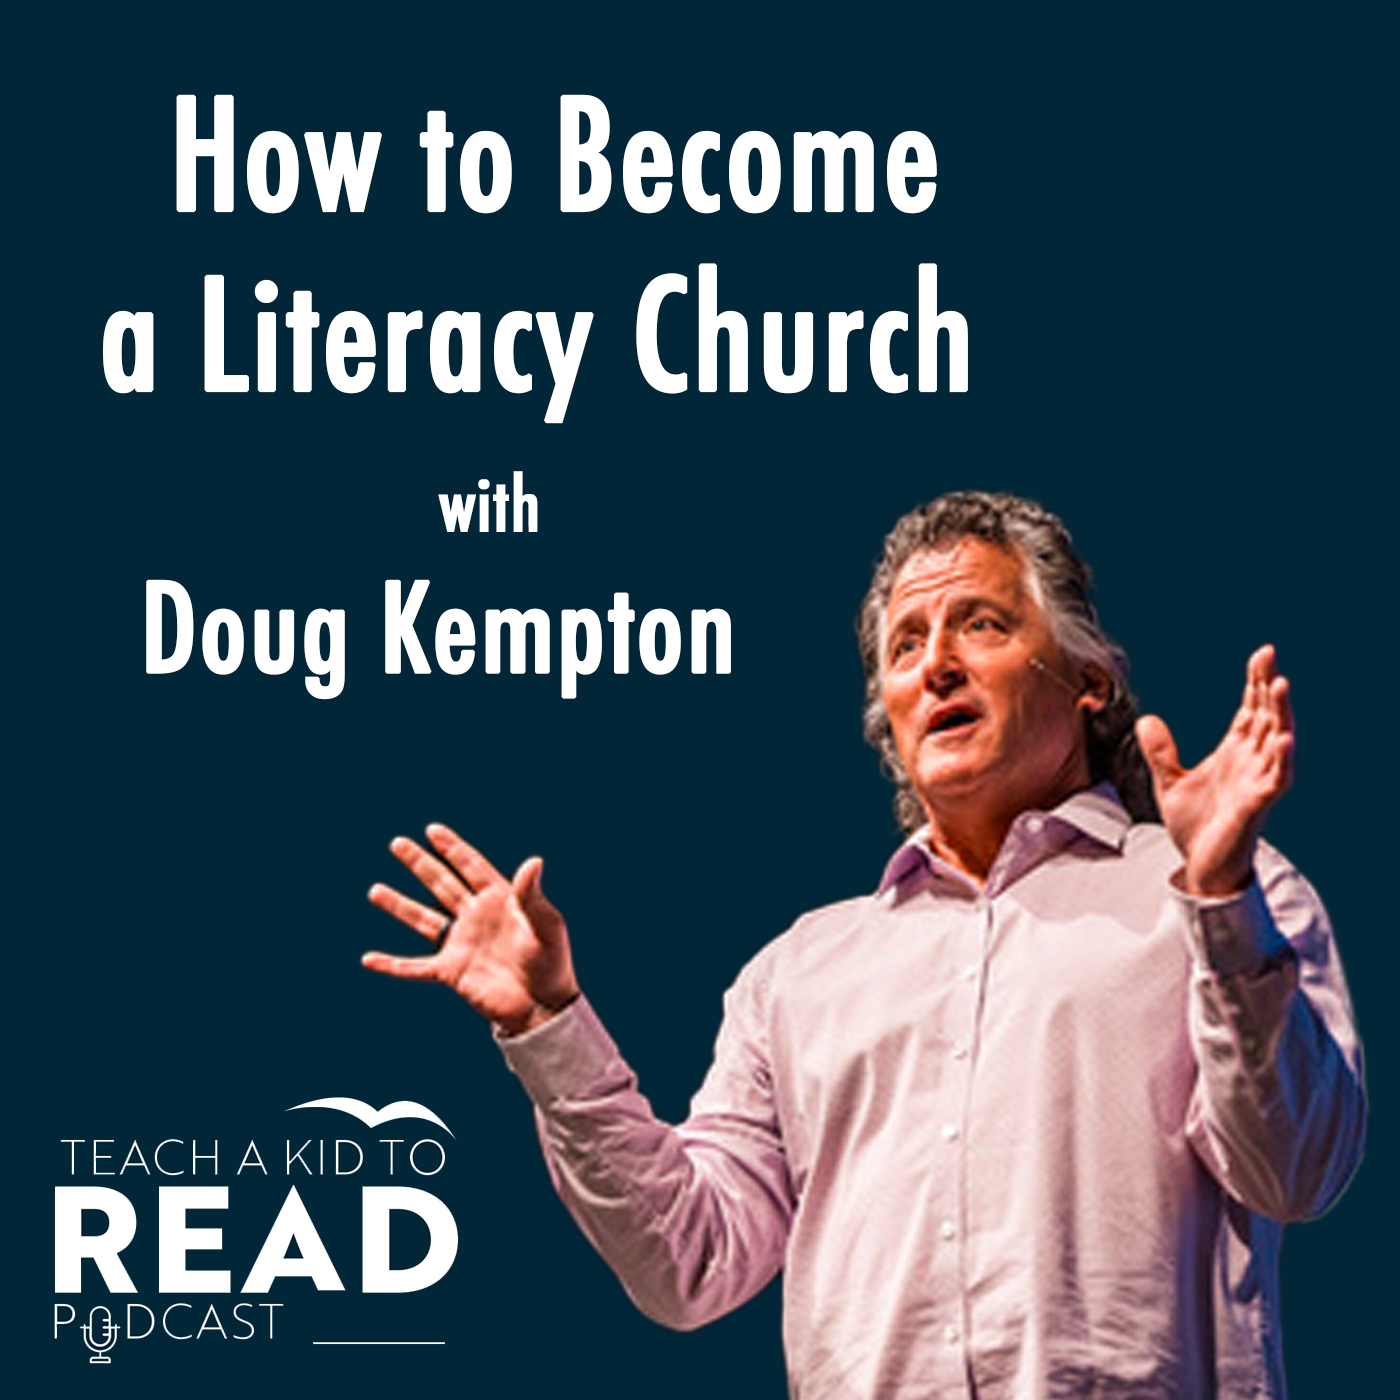 How to Become a Literacy Church